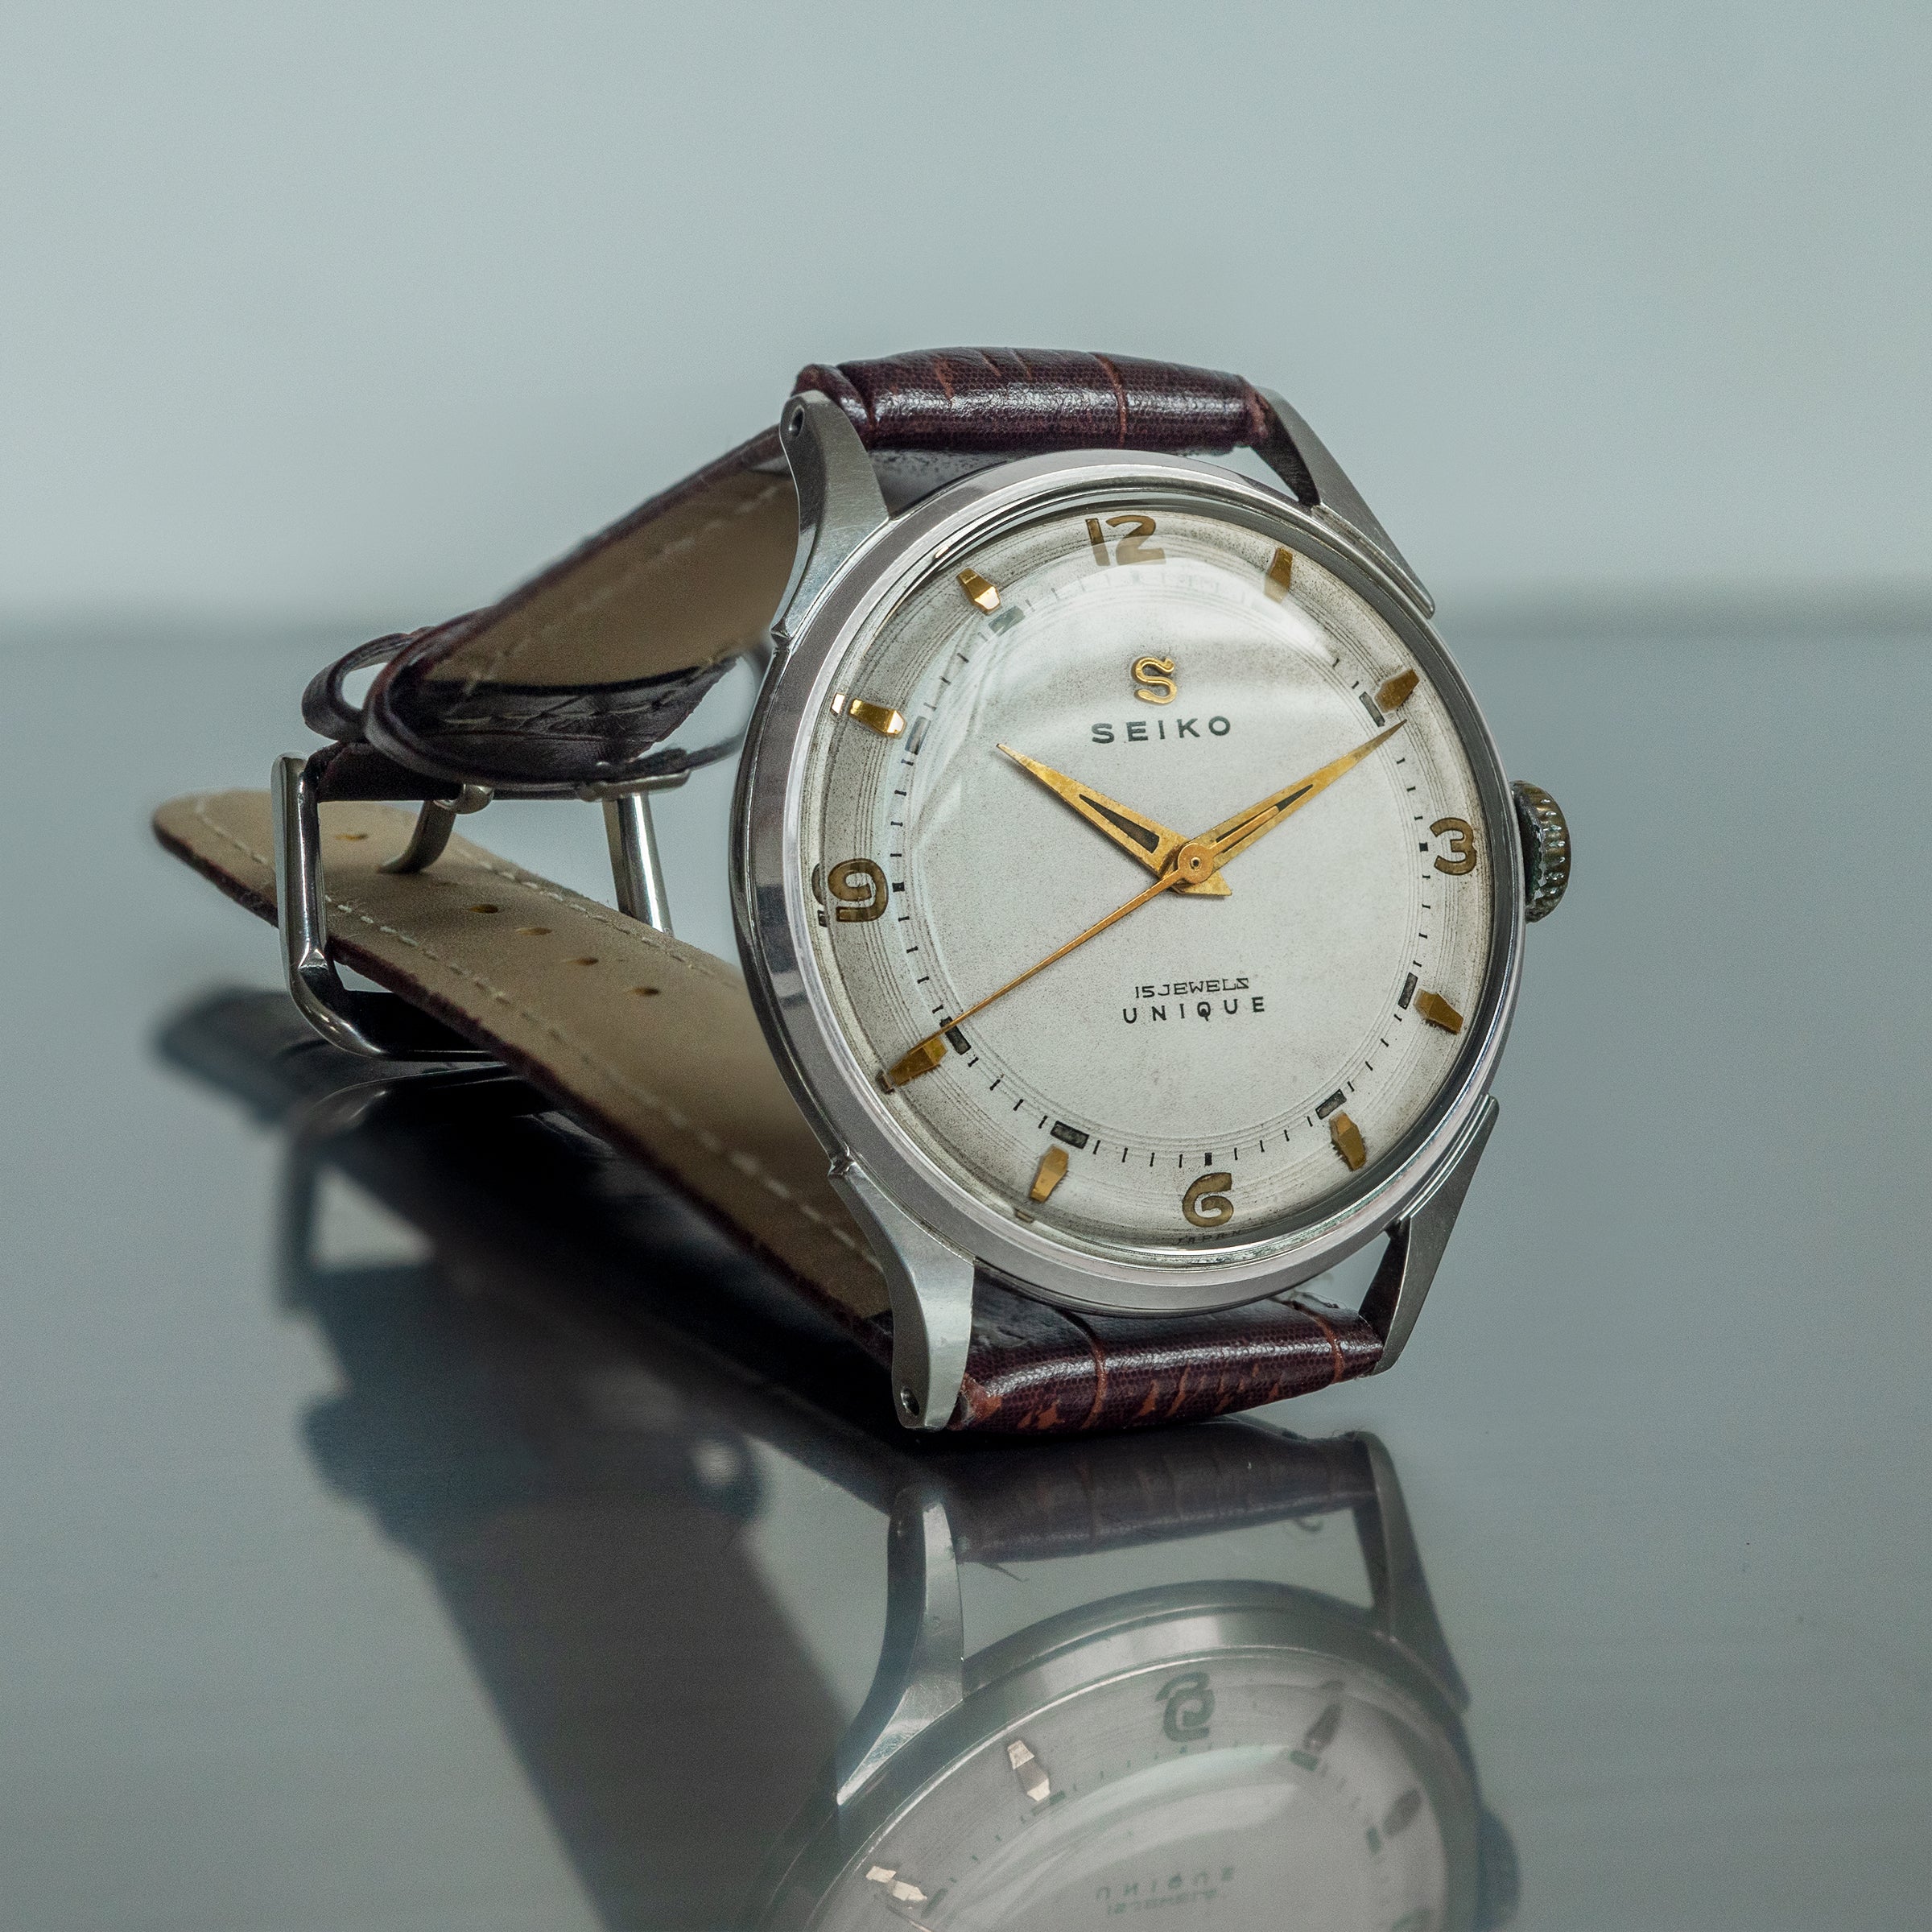 No. 479 / Seiko Unique - 1956 – From Time To Times